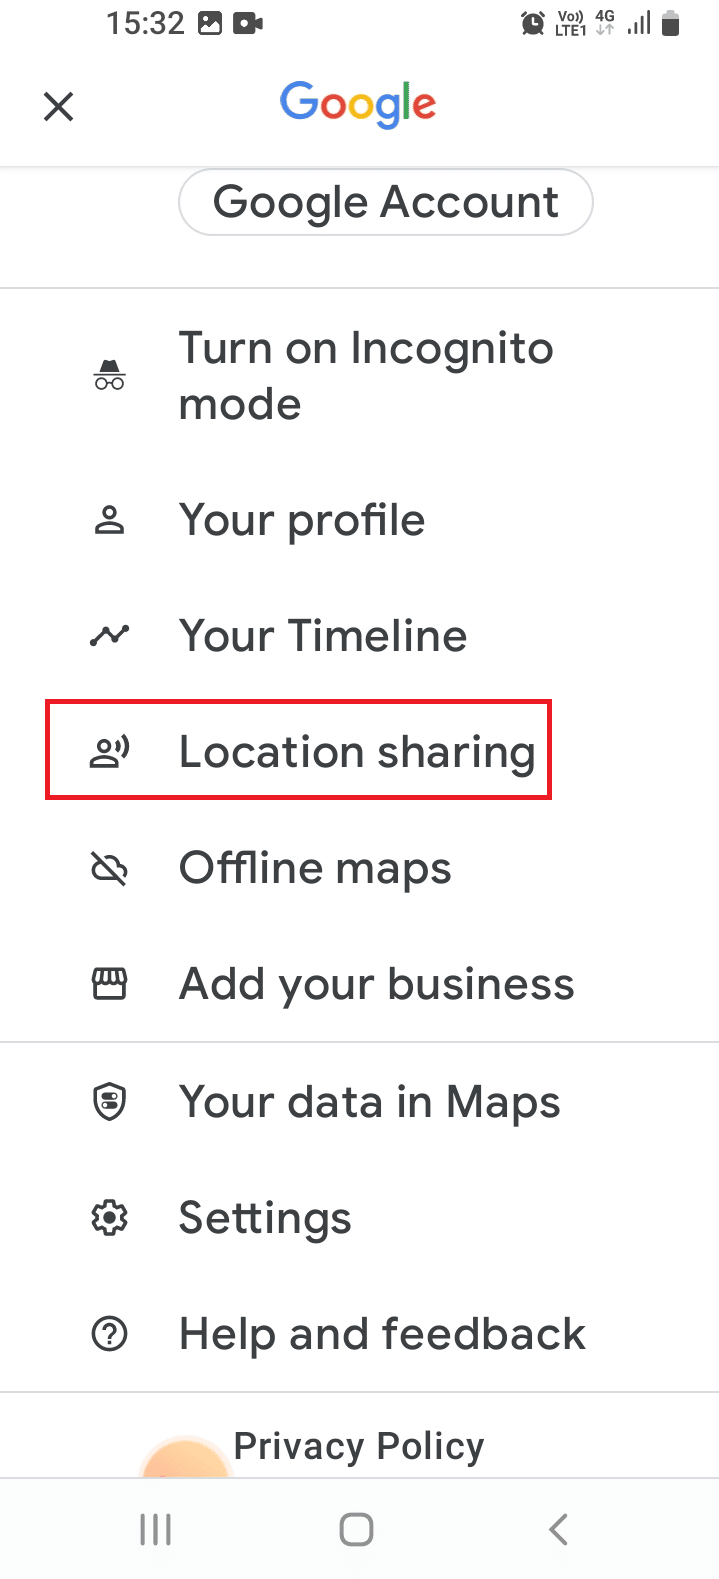 Tap on the Location sharing option